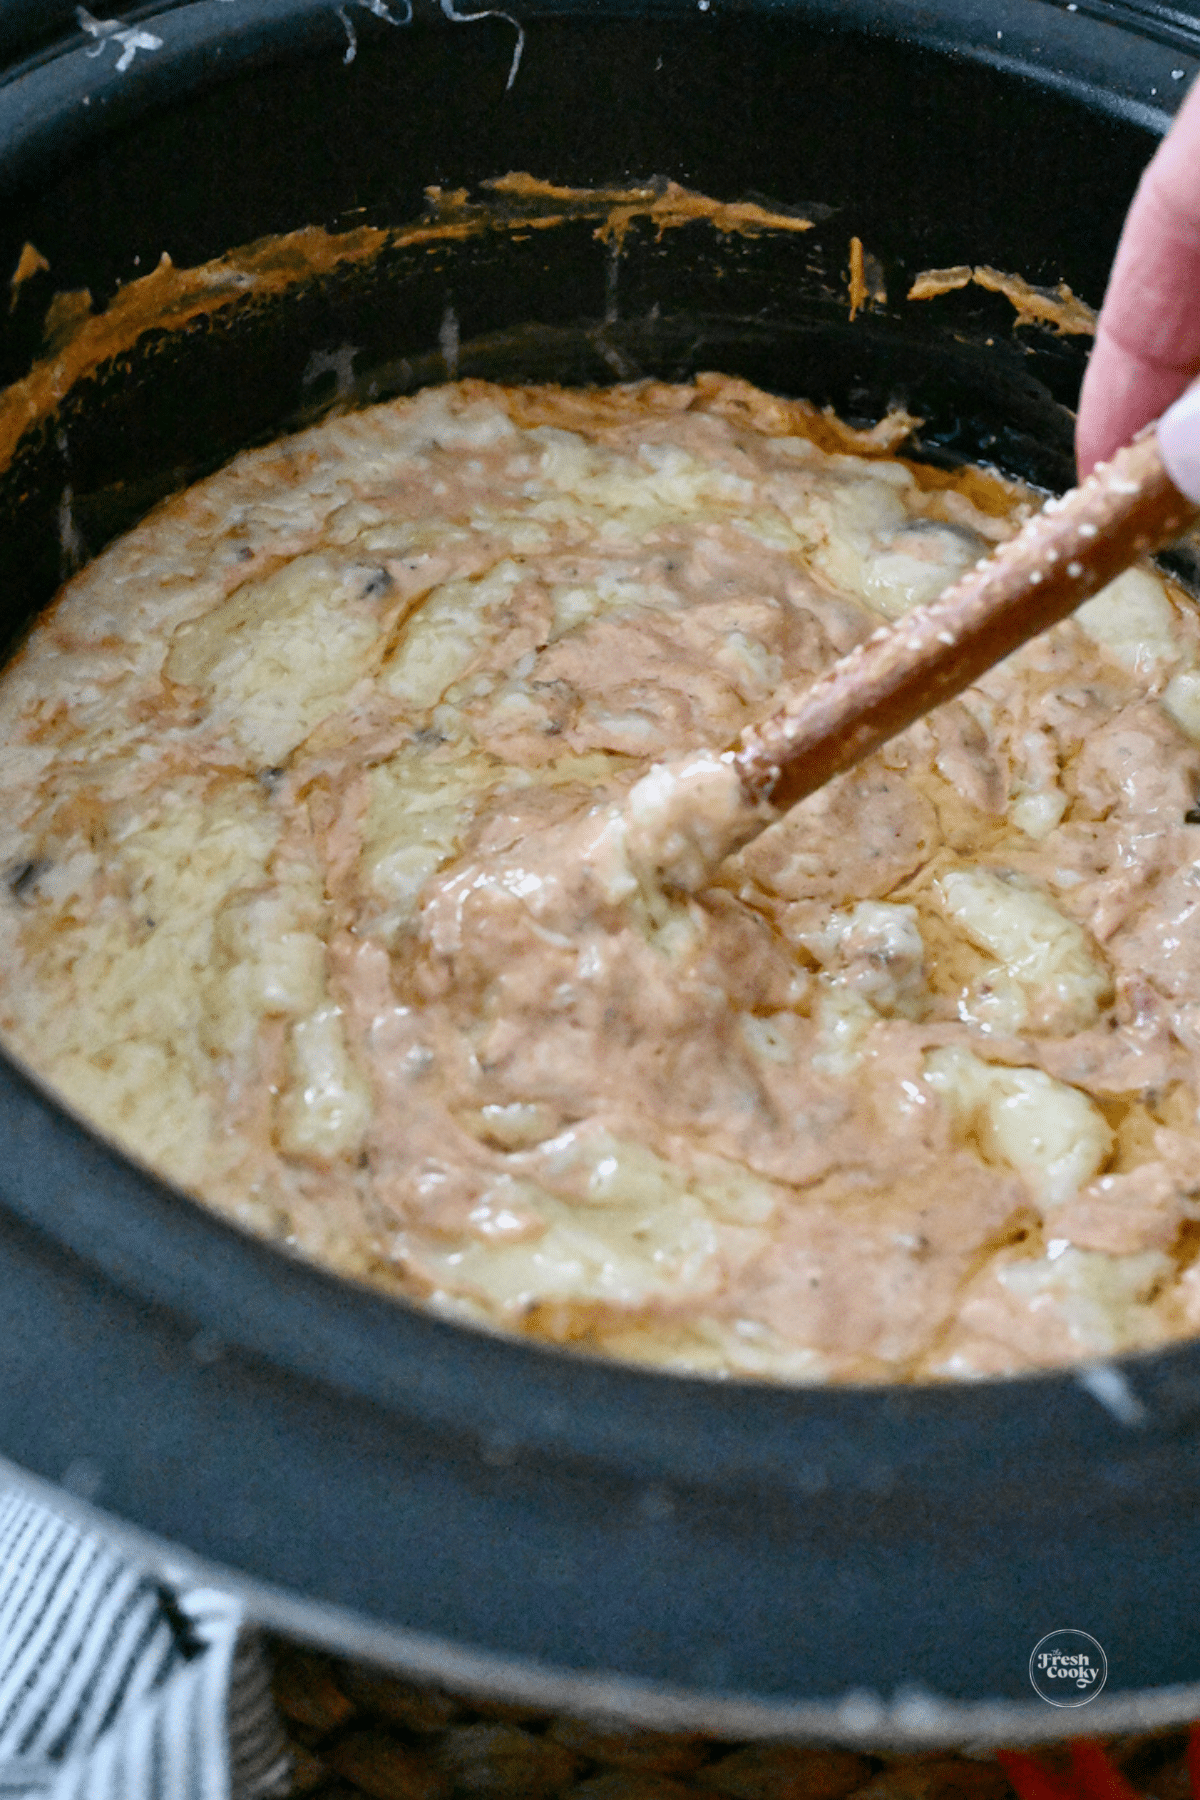 Hand dipping a pretzel rod into gooey chili cheese dip in crock pot.